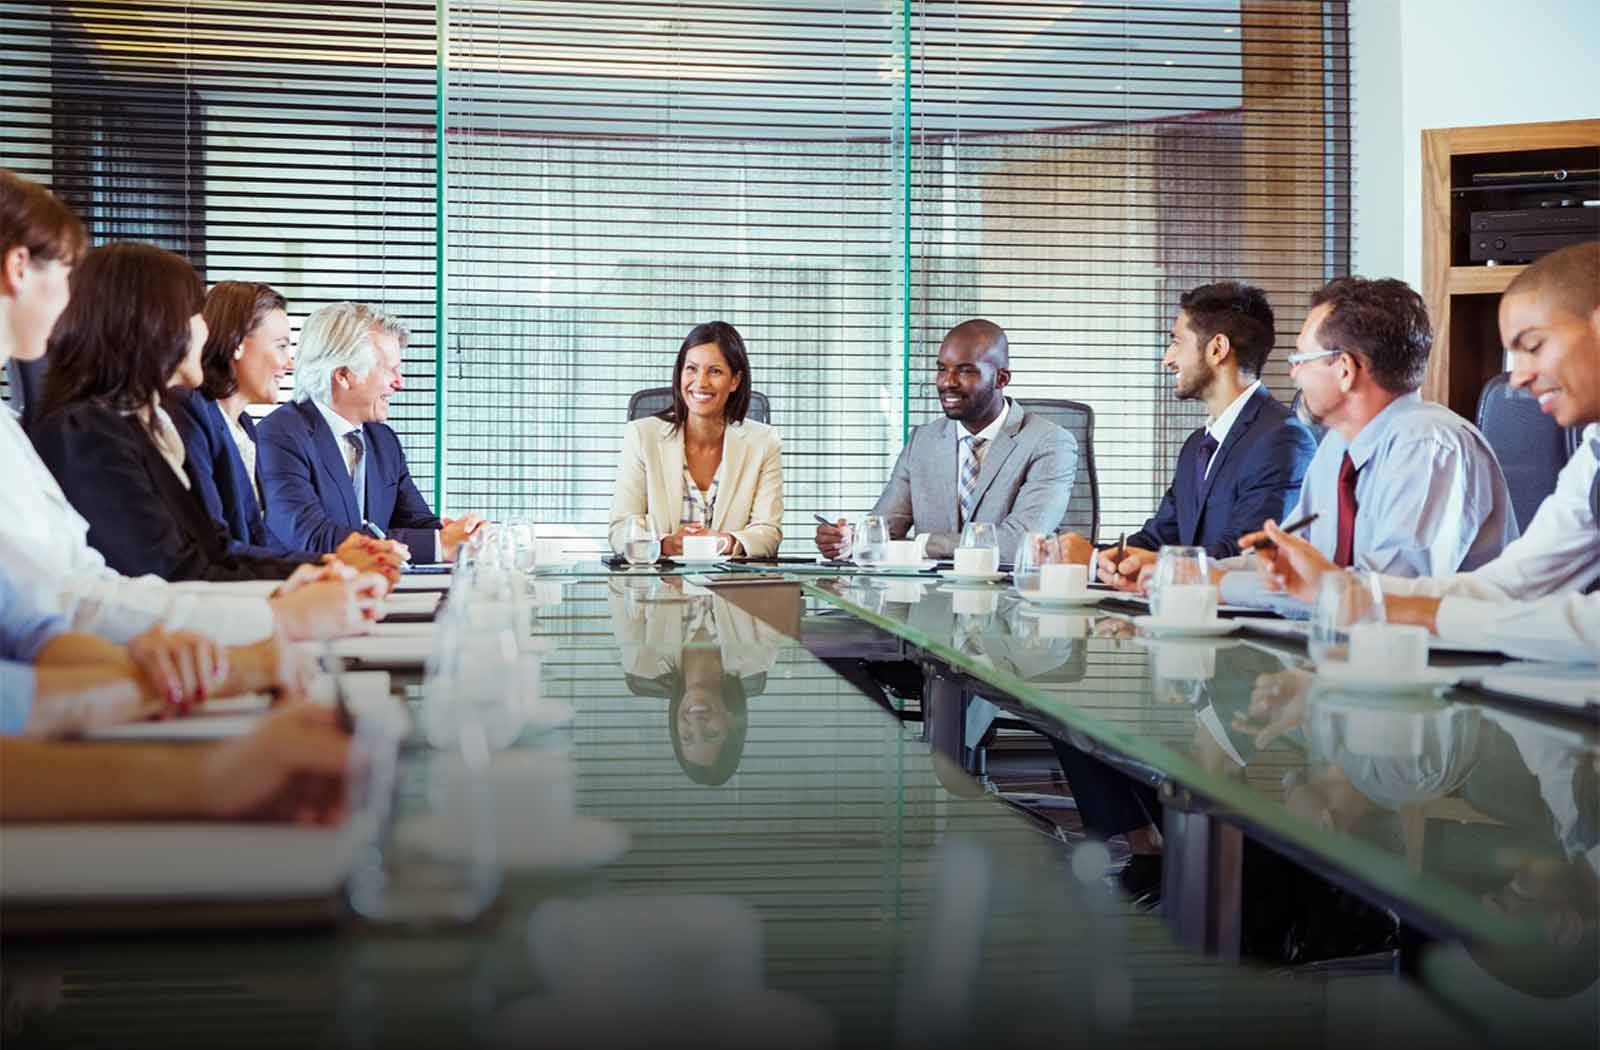 Business people having meeting in a conference room, smiling and discussing